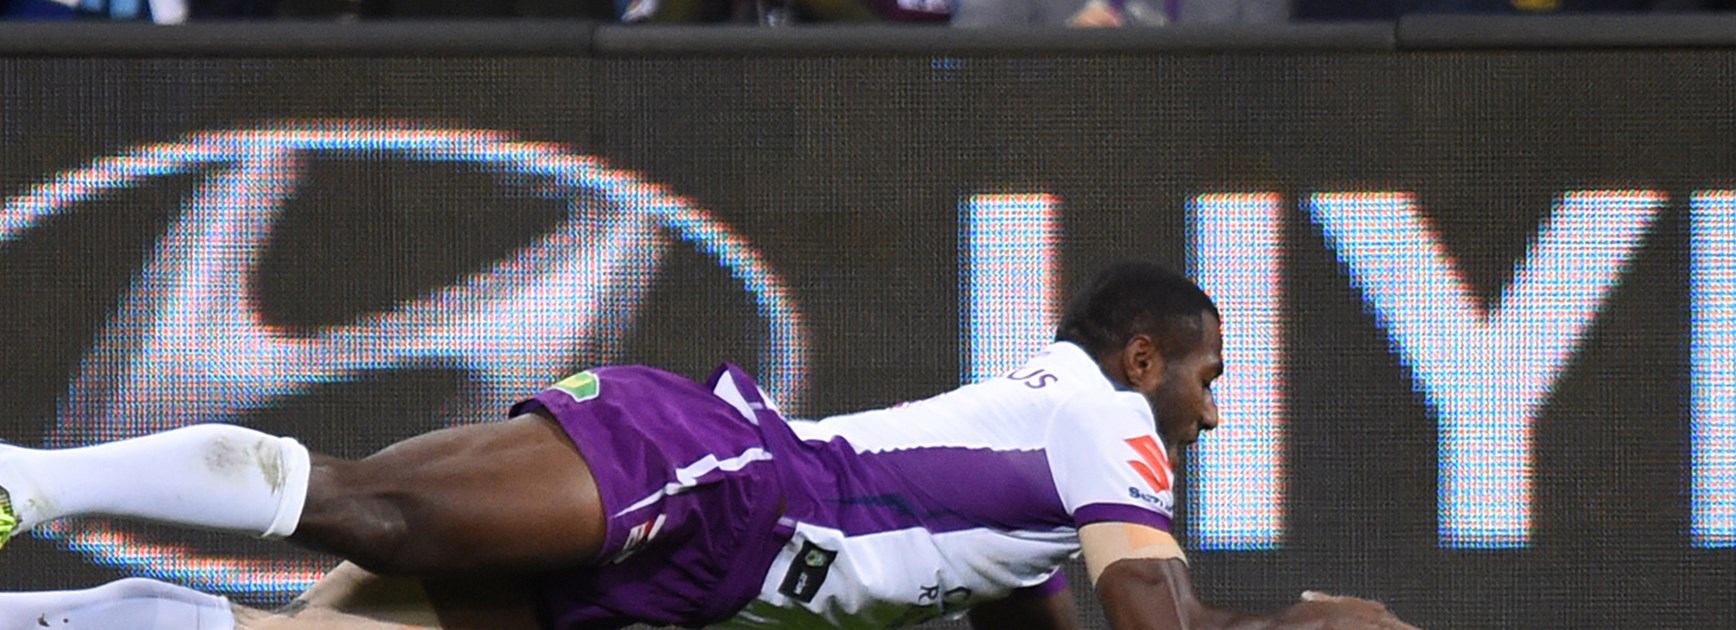 Suliasi Vunivalu scores another try for the Storm against the Broncos at Suncorp Stadium.